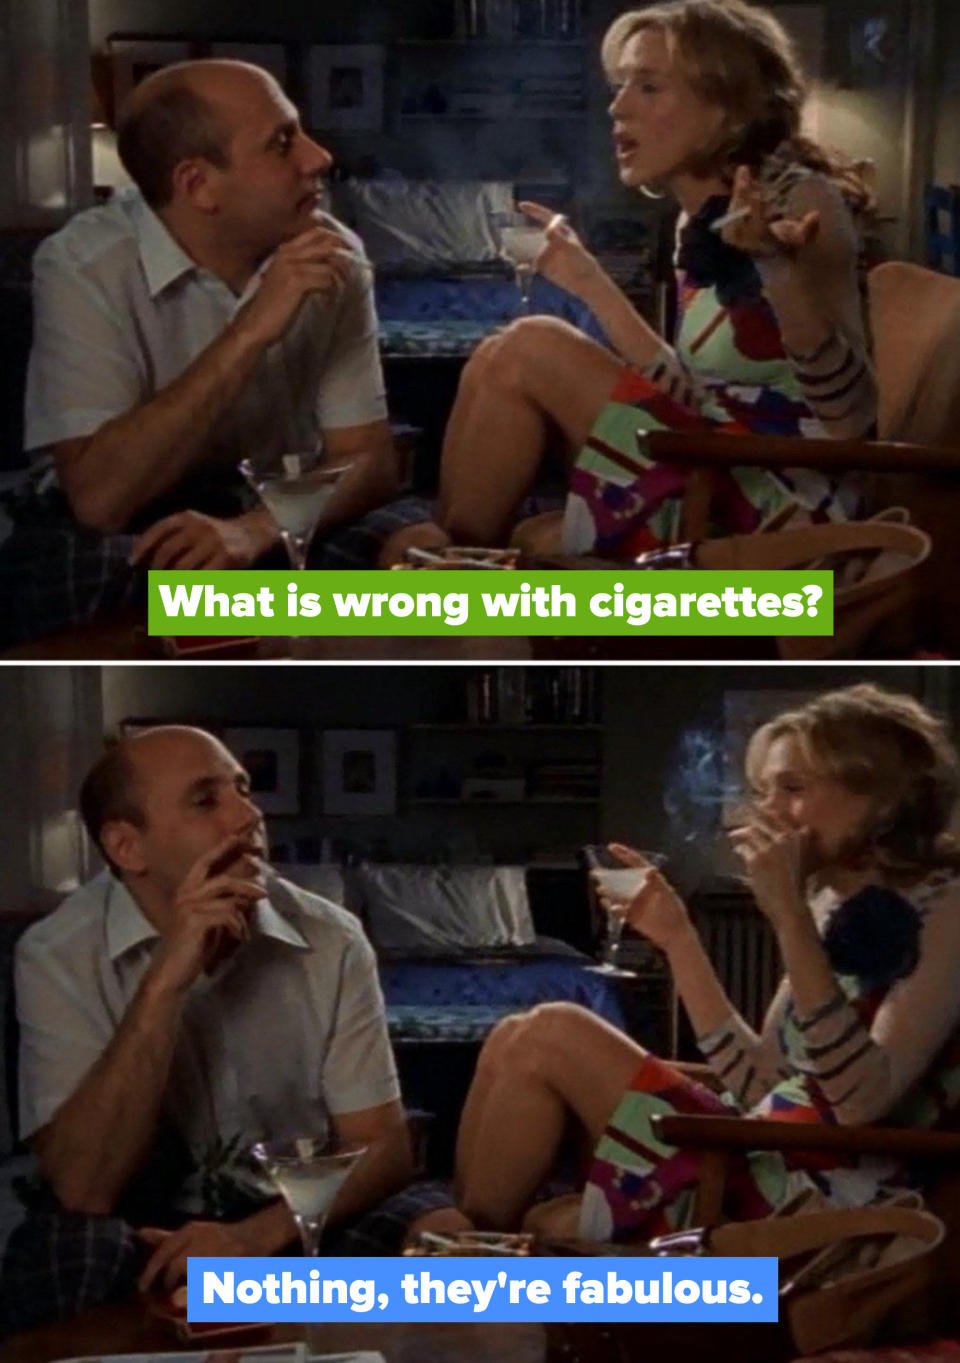 Carrie to Stanford: "What is wrong with cigarettes?" Stanford: "Nothing, they're fabulous"